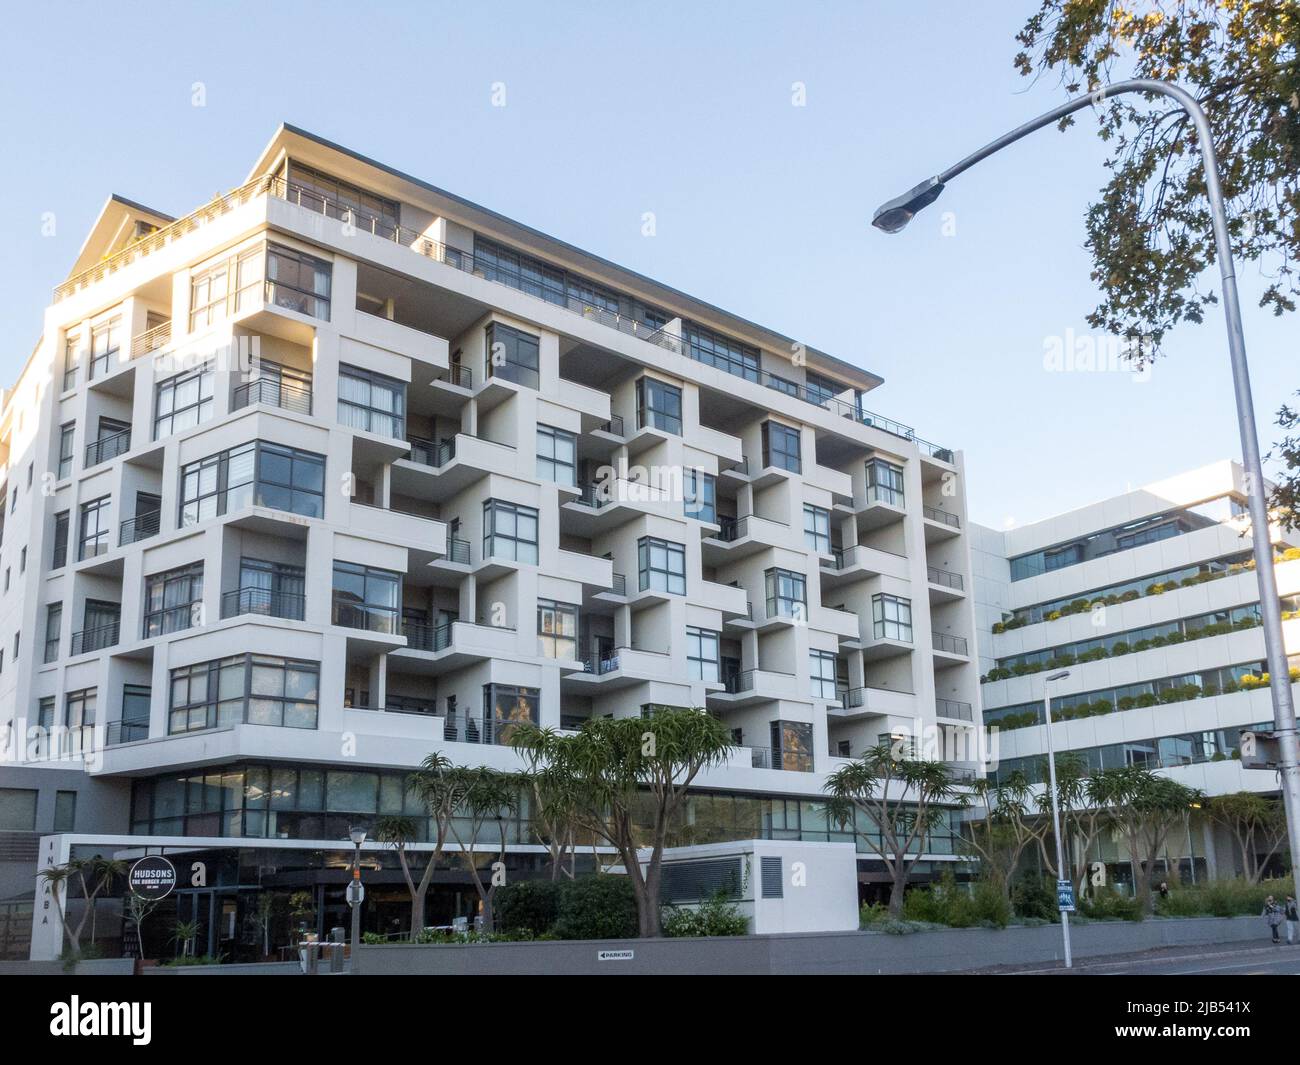 contemporary or modern architecture style apartment block or building in Claremont which is a suburb of Cape Town, South Africa Stock Photo